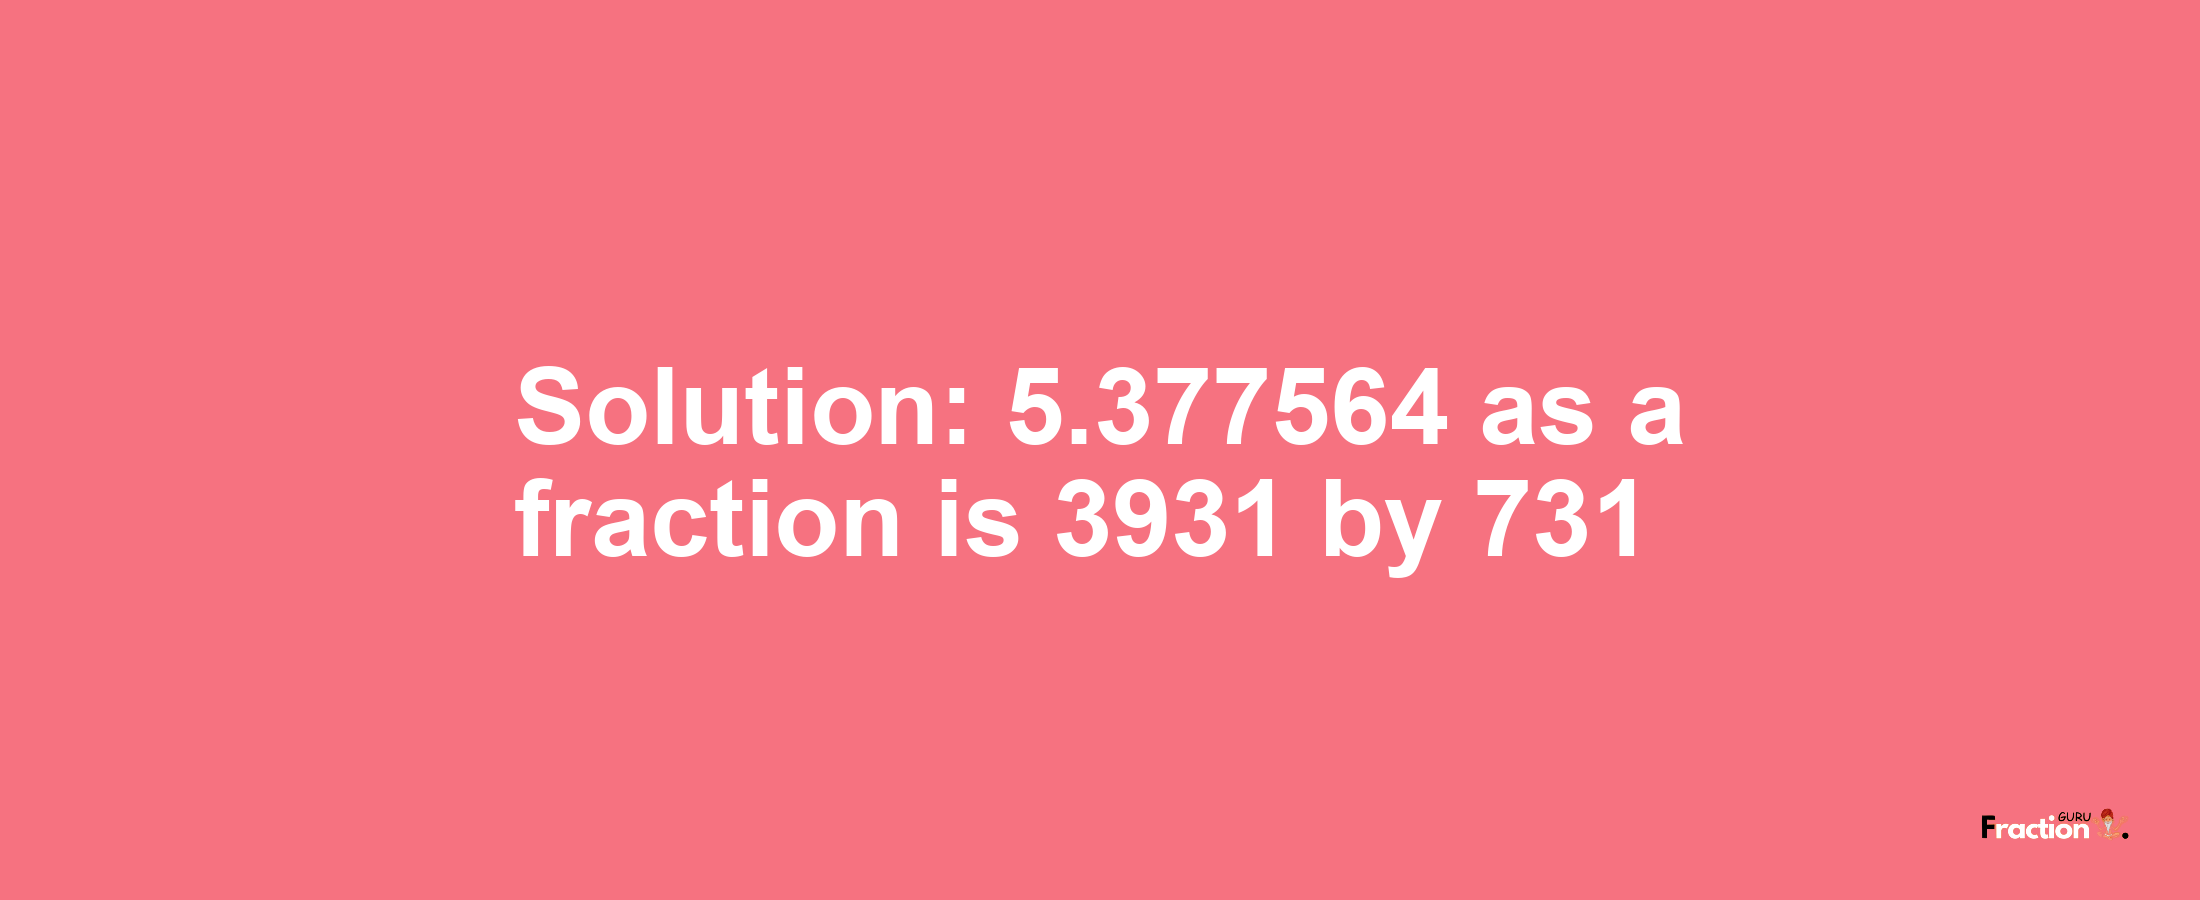 Solution:5.377564 as a fraction is 3931/731